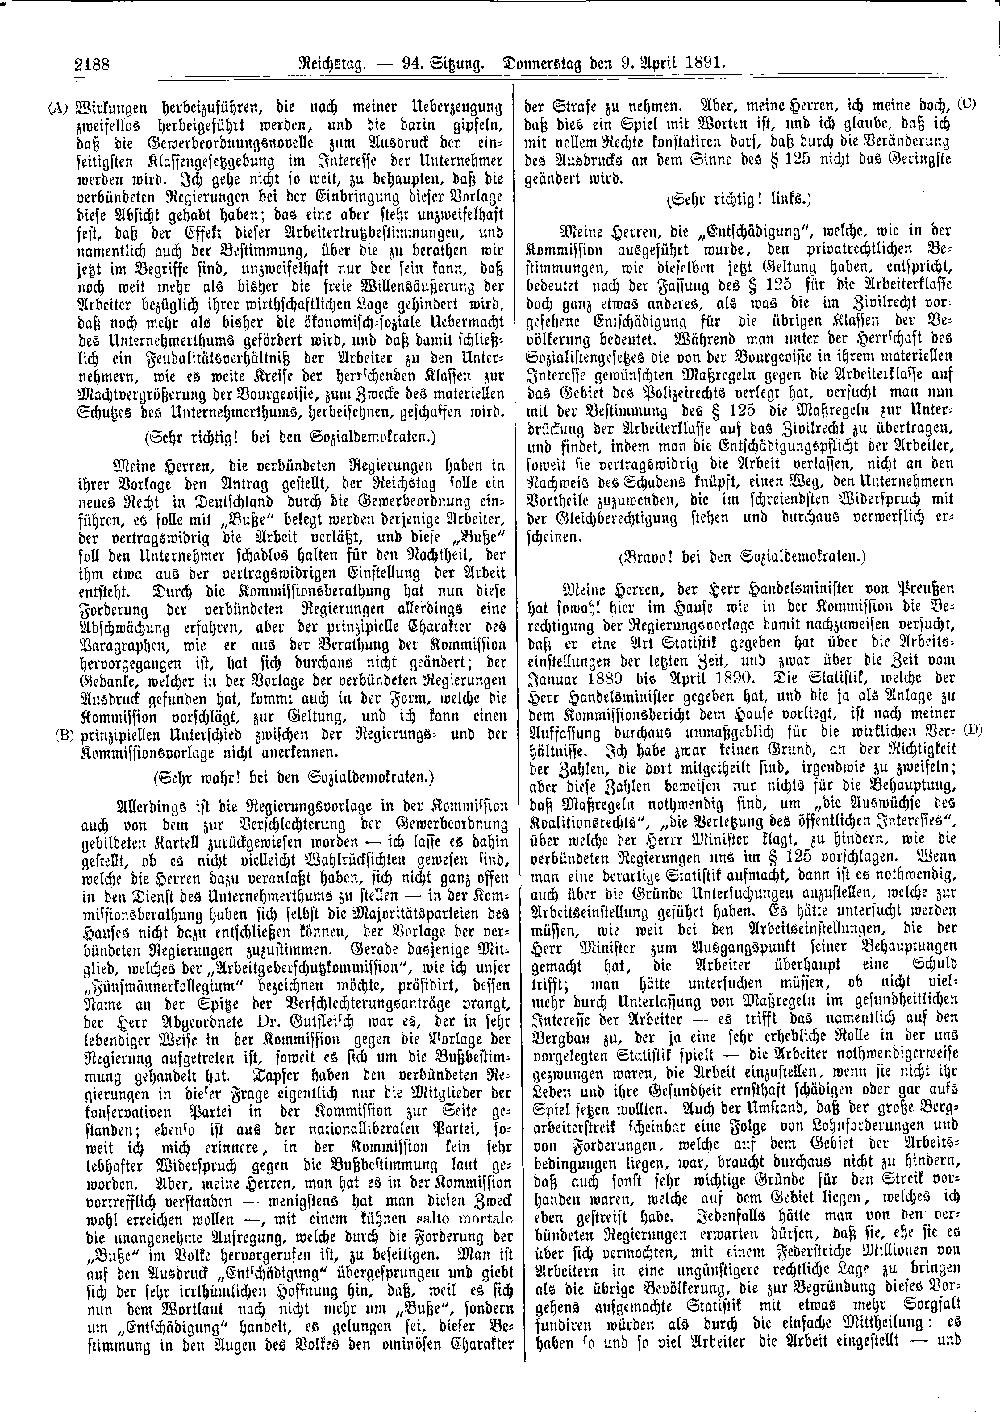 Scan of page 2188